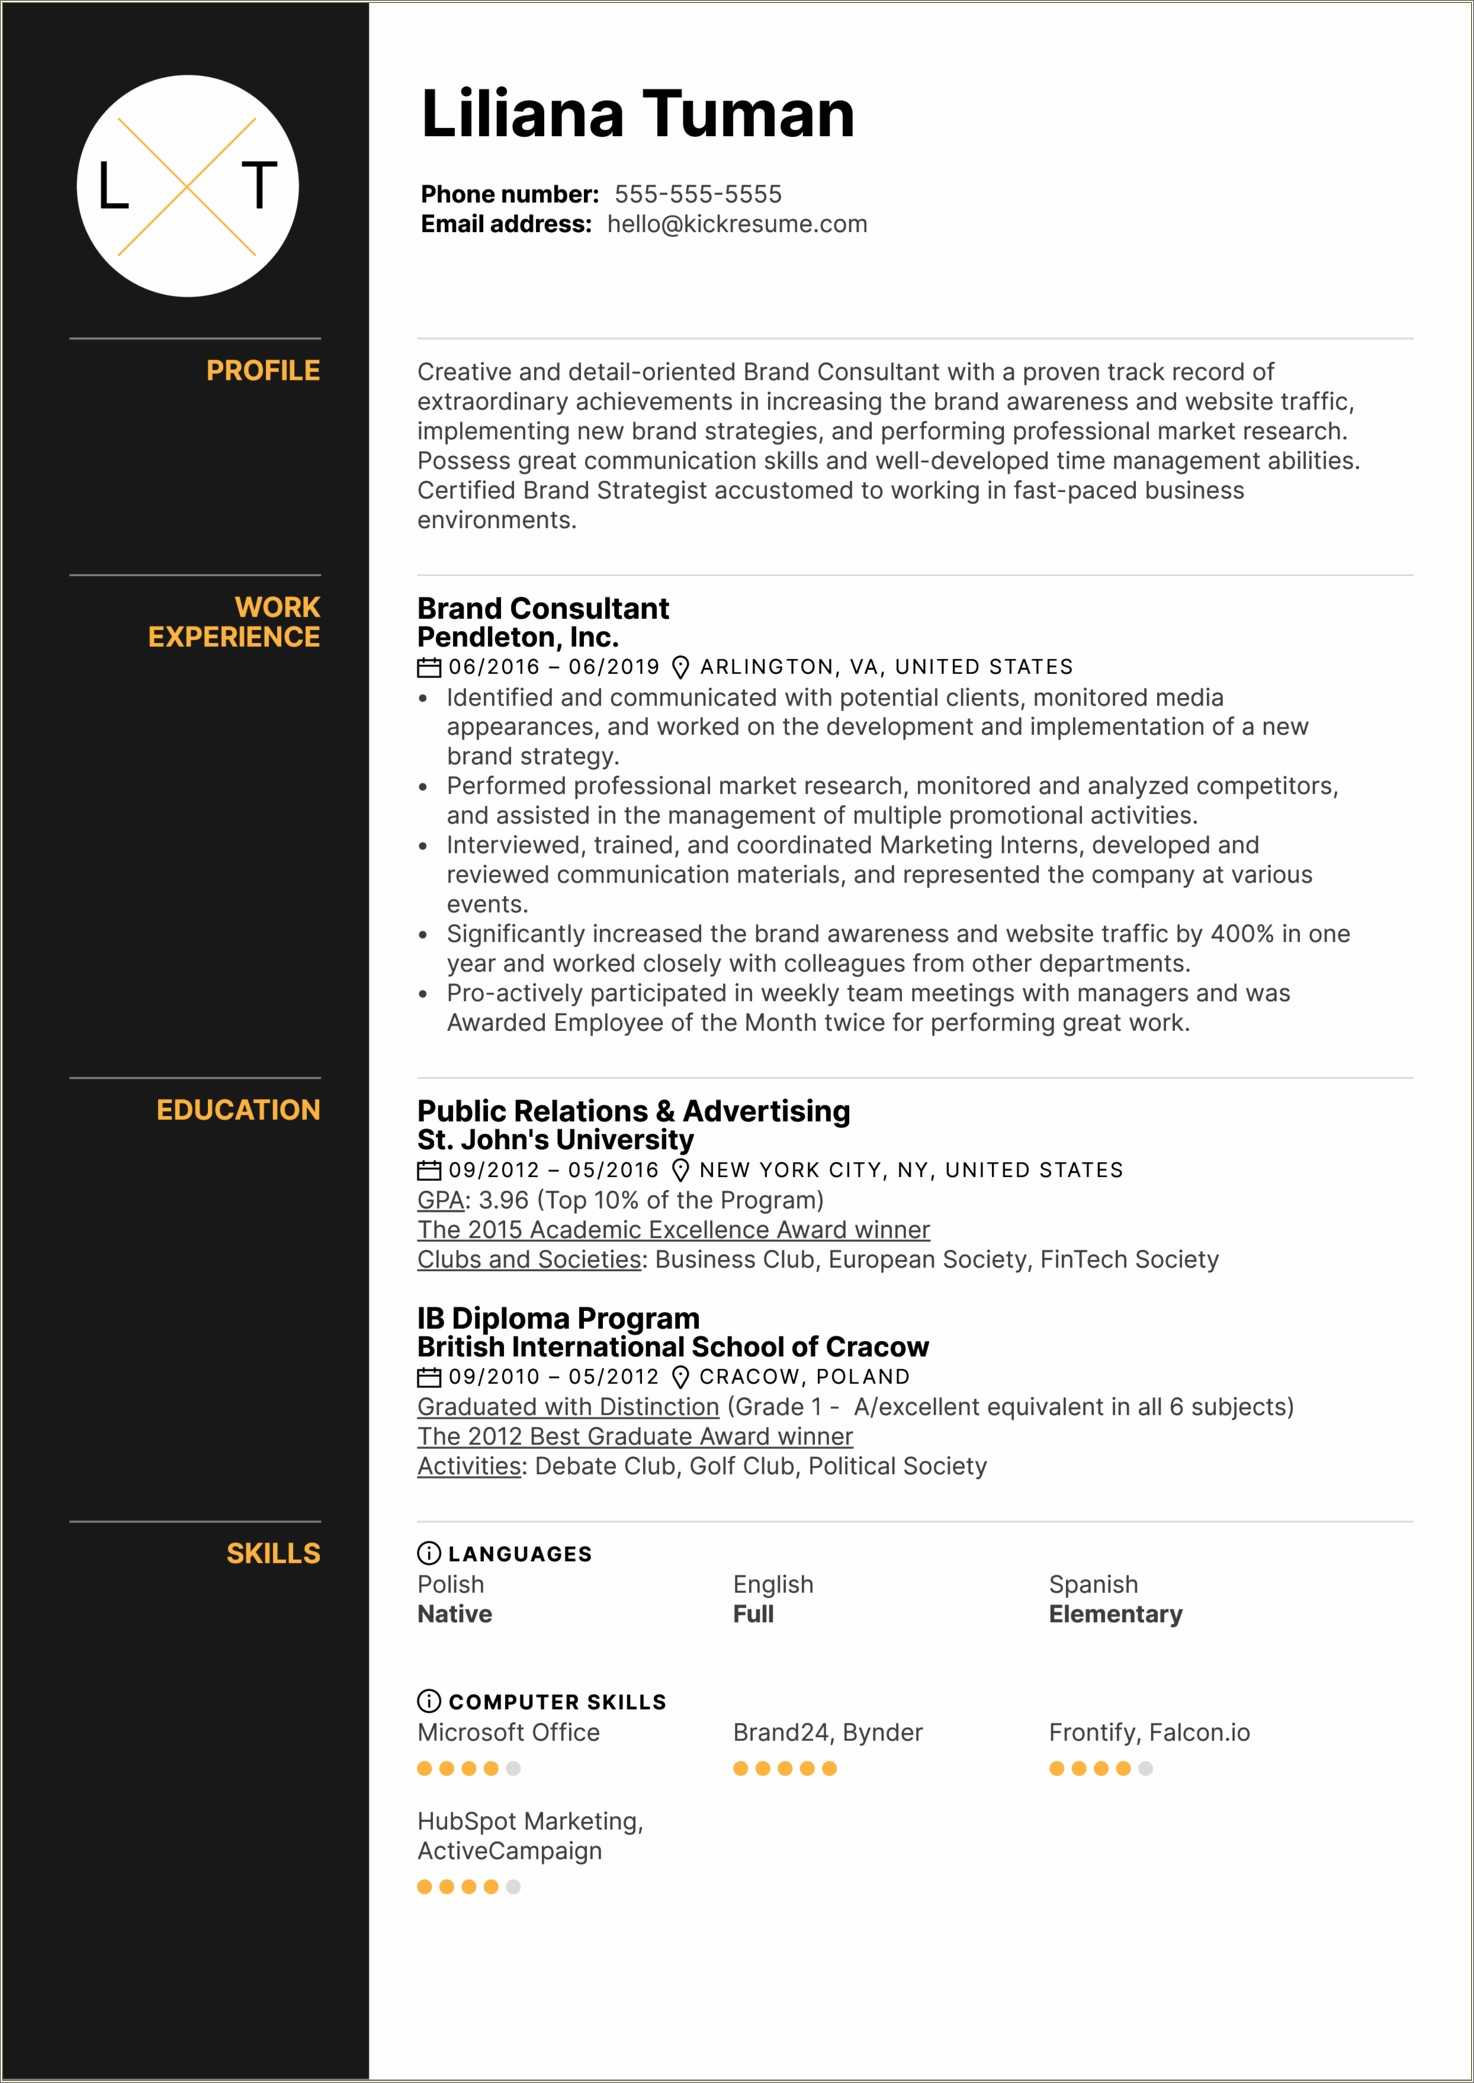 Customer Strategy Consultant Resume Sample - Resume Example Gallery